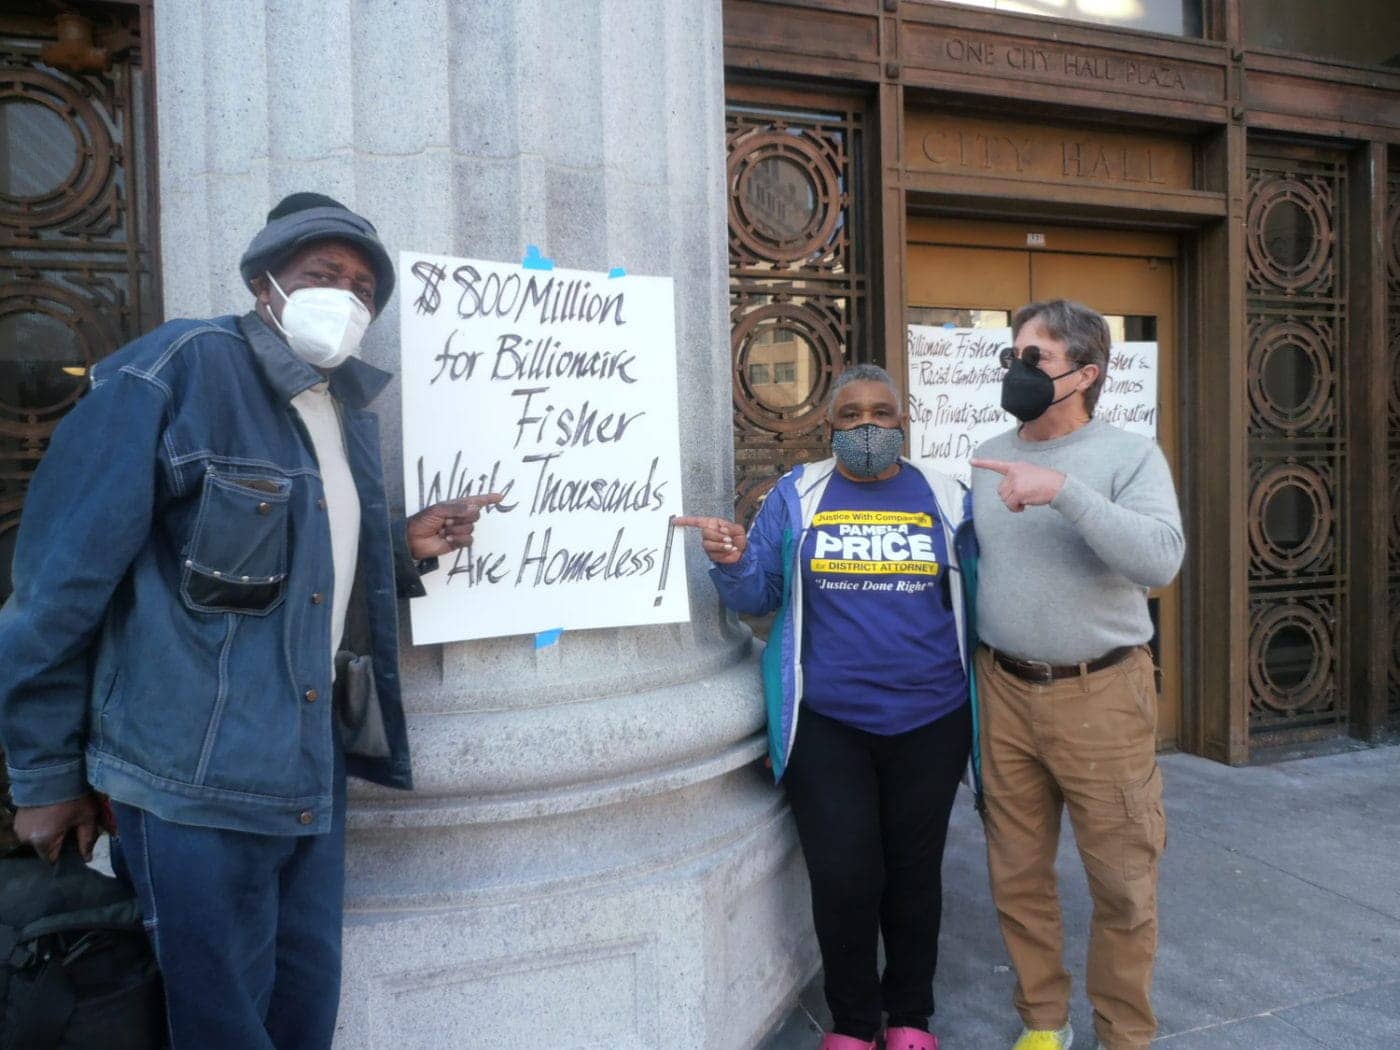 Gene-Hazard-Melody-Davis-and-Patrick-Fahy-at-Oakland-City-Hall-protest-against-Fisher-family-housing-project-2022-by-Jahahara-1400x1050, Go tella OurStories and futures, Culture Currents 